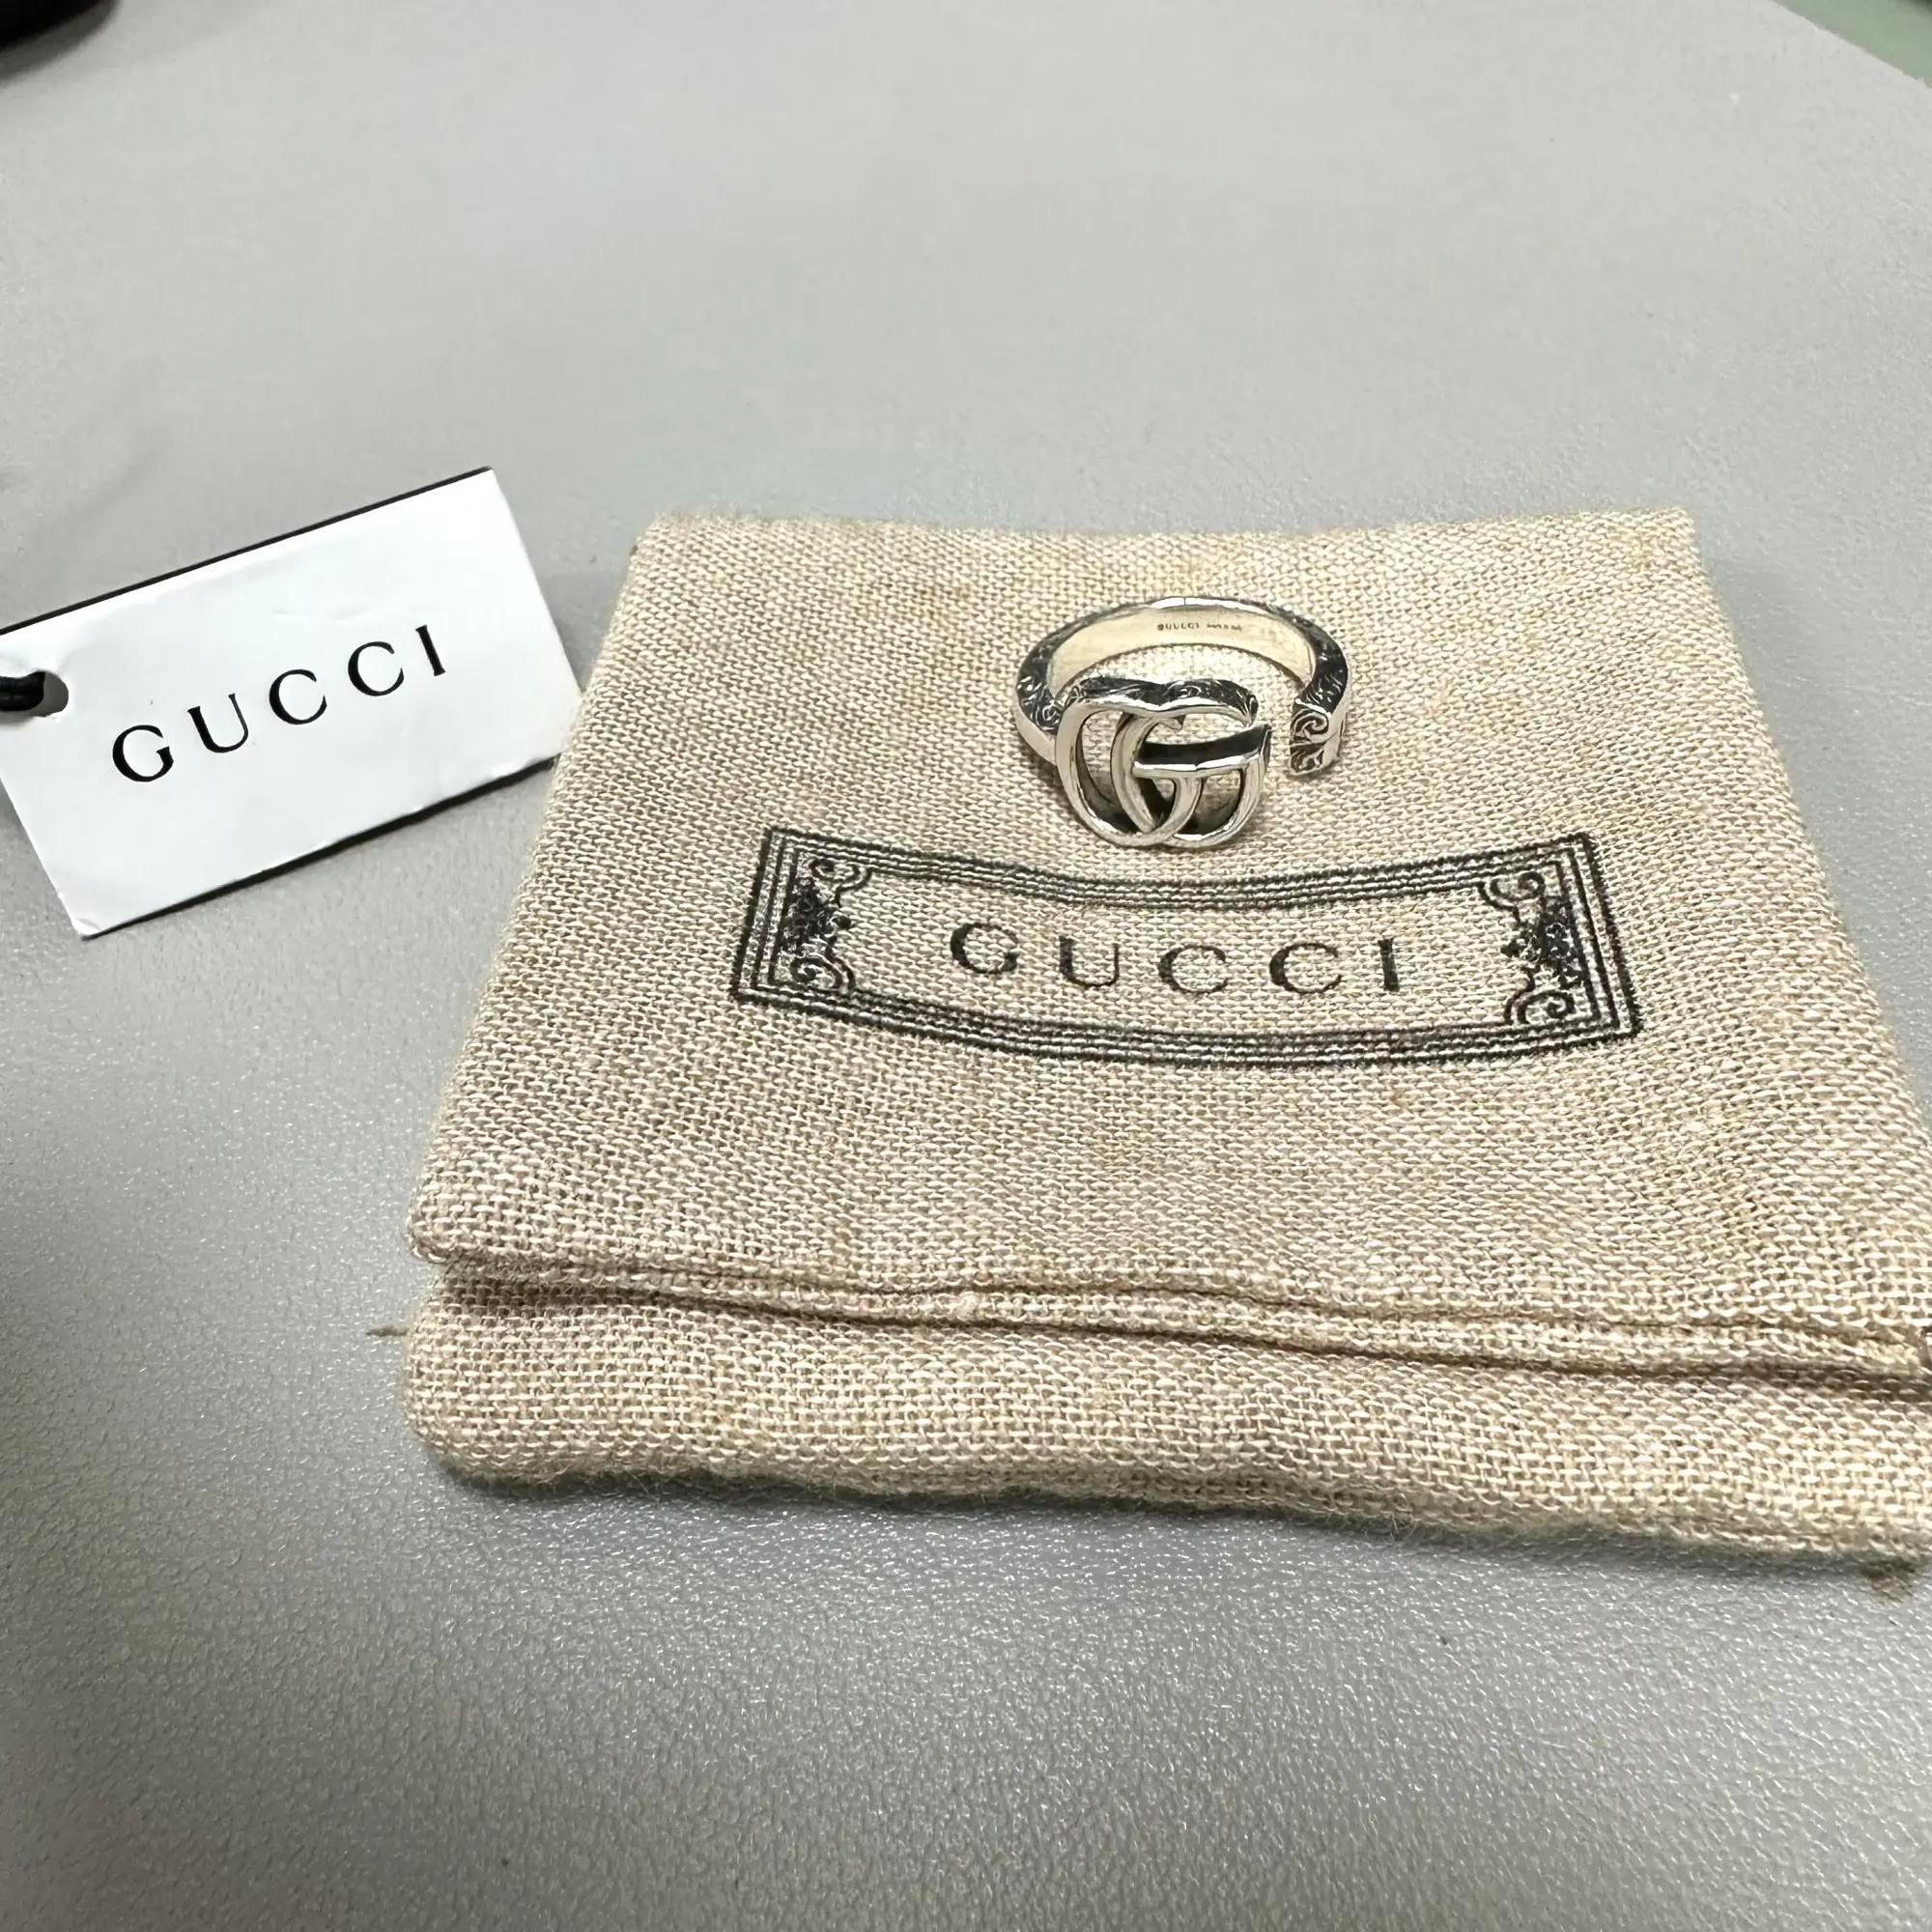 Women's or Men's Gucci GG Marmont Open Key Ring 925 Sterling Silver Aged Finish Size 7